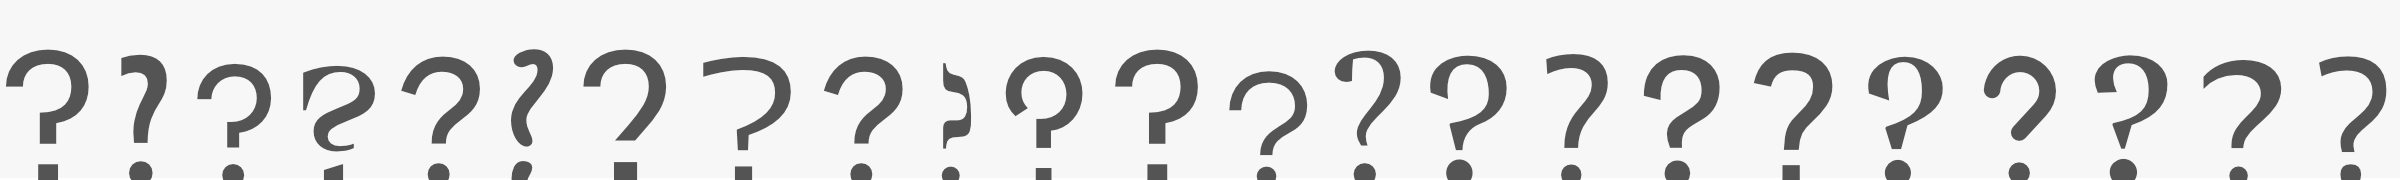 Question marks, presented in Fontwerk fonts